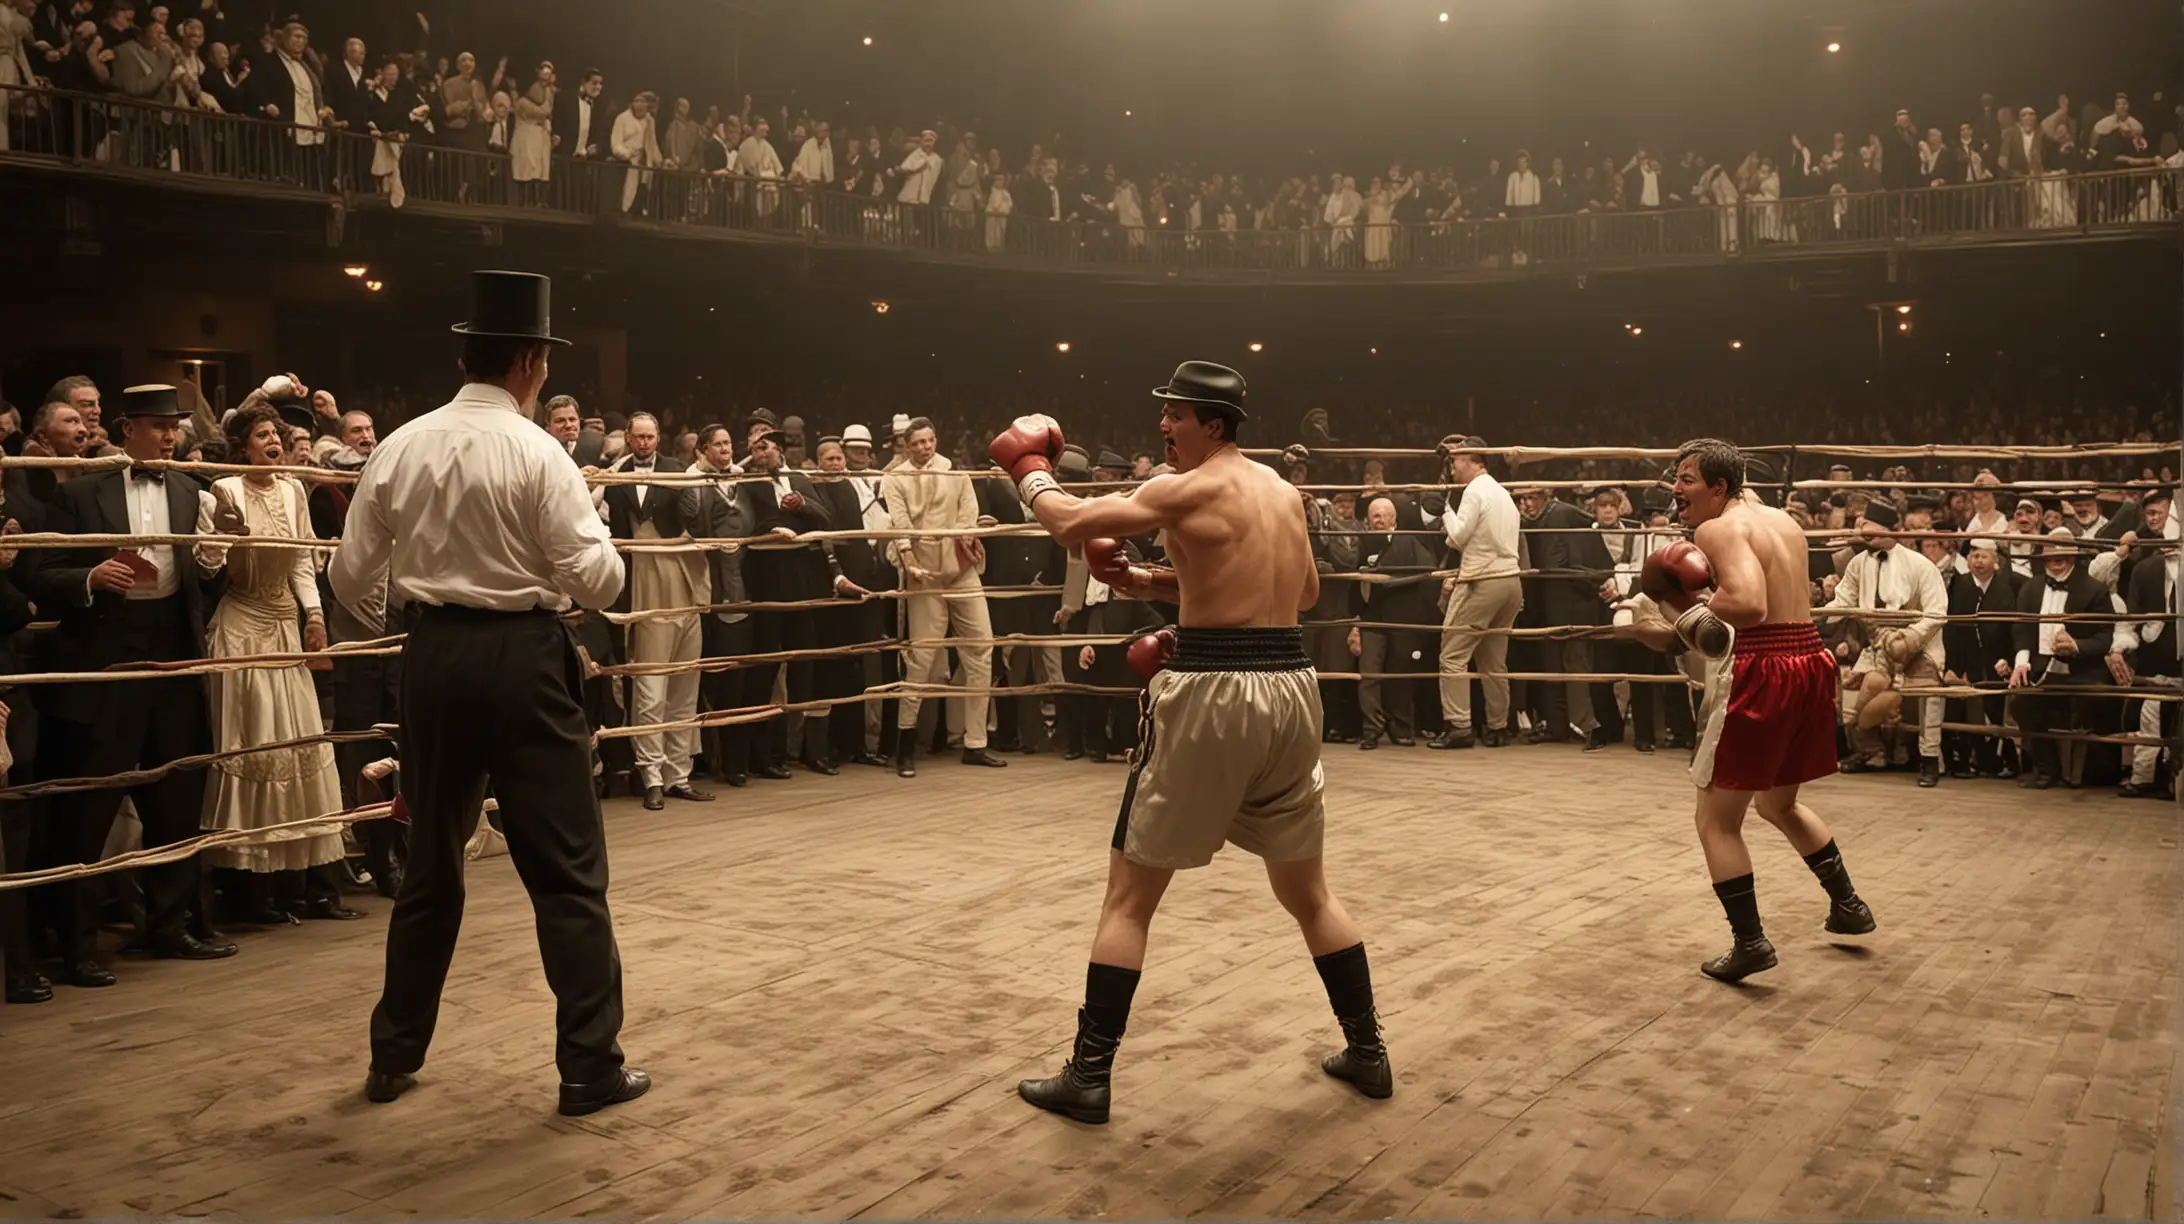 Visualize a bustling Victorian-era boxing arena. Create an image capturing the energy as spectators cheer on their favorite pugilists in the ring. The crowd should be diverse, with men in top hats and women in elegant dresses. The boxers should be mid-fight, with one landing a powerful punch while the other dodges, sweat flying from their brows.